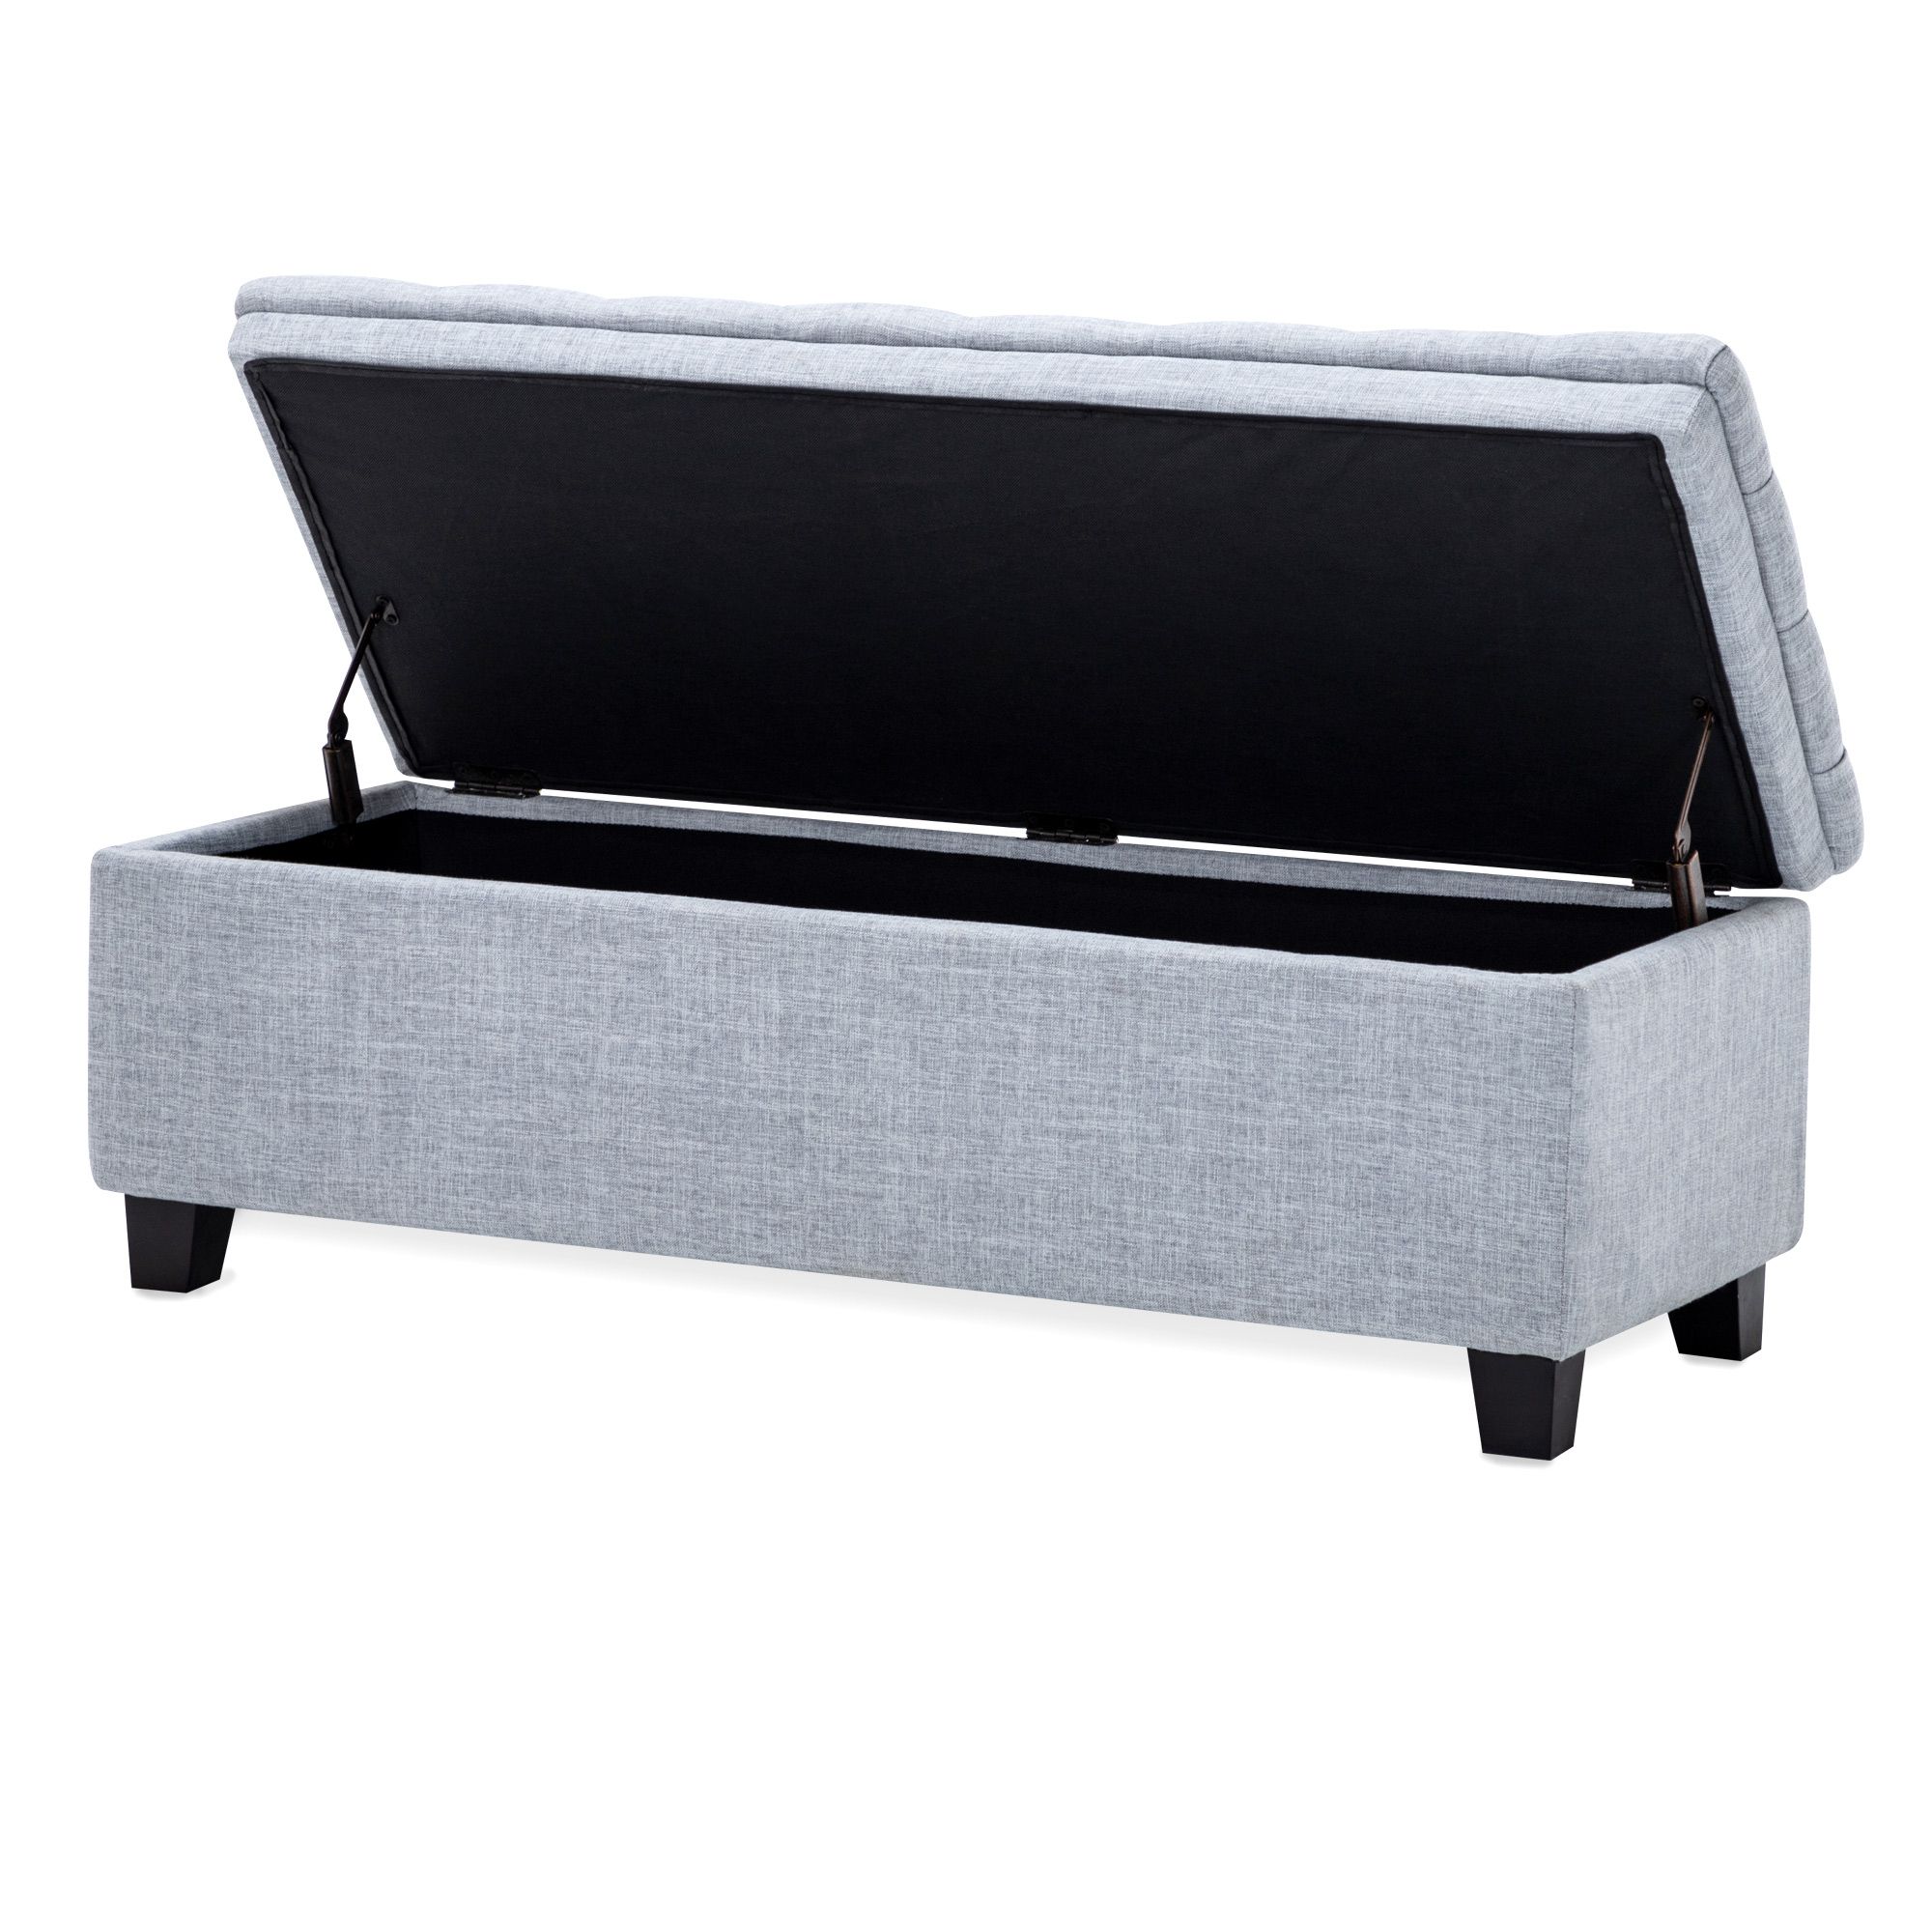 Tufted Upholstered Fabric Large Storage Ottoman Bench Footrest, Light In Fabric Tufted Storage Ottomans (View 20 of 20)